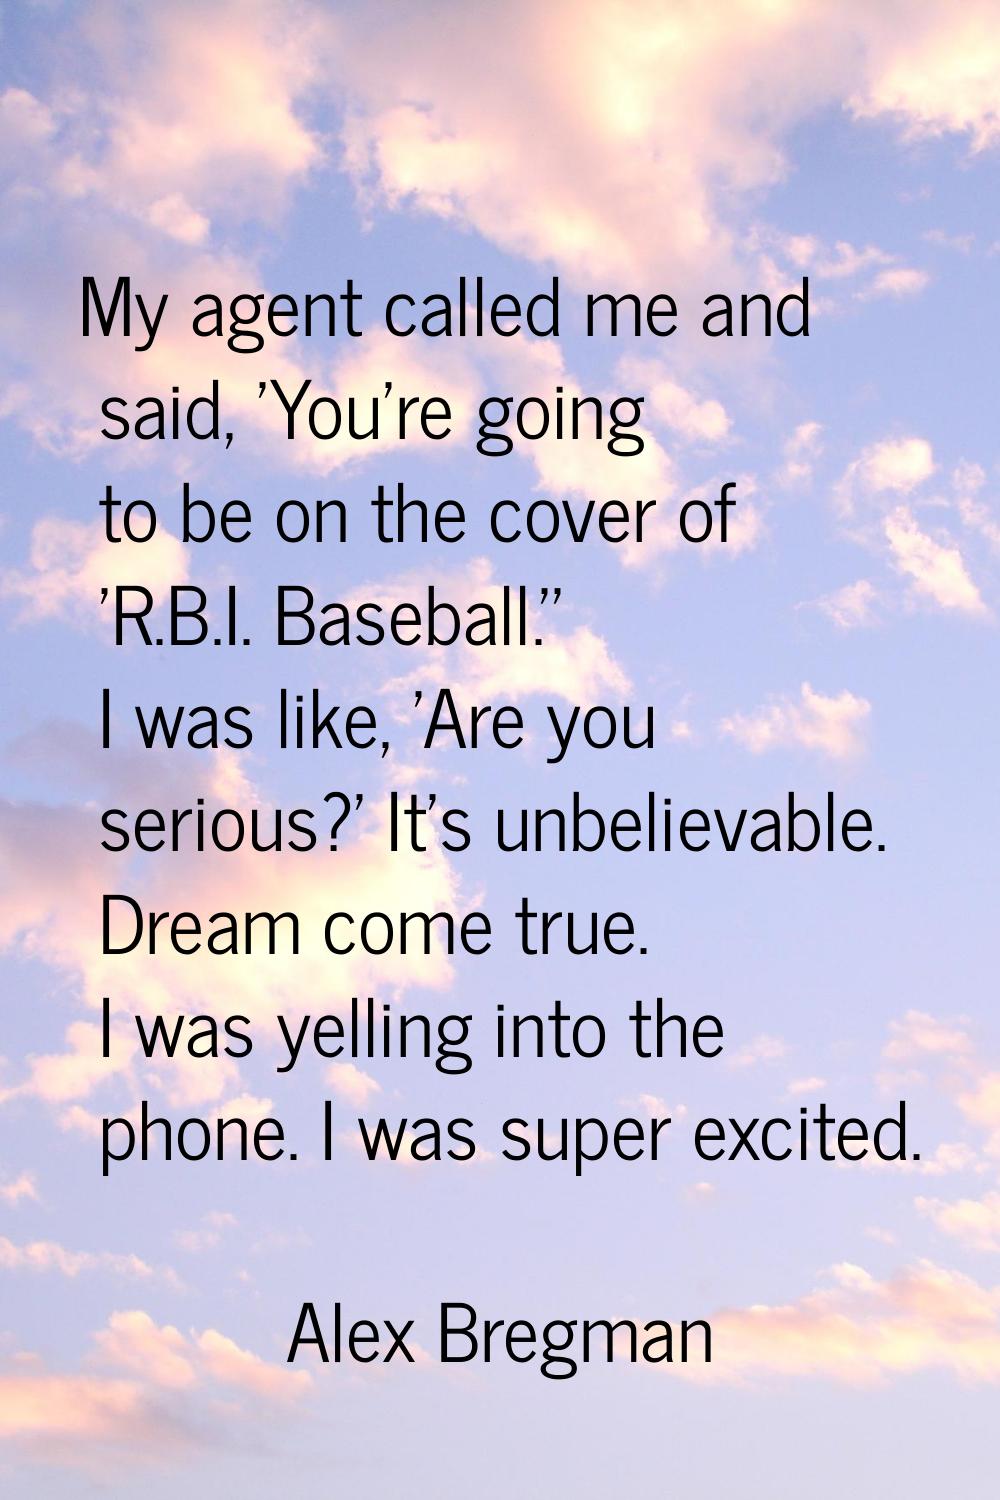 My agent called me and said, 'You're going to be on the cover of 'R.B.I. Baseball.'' I was like, 'A